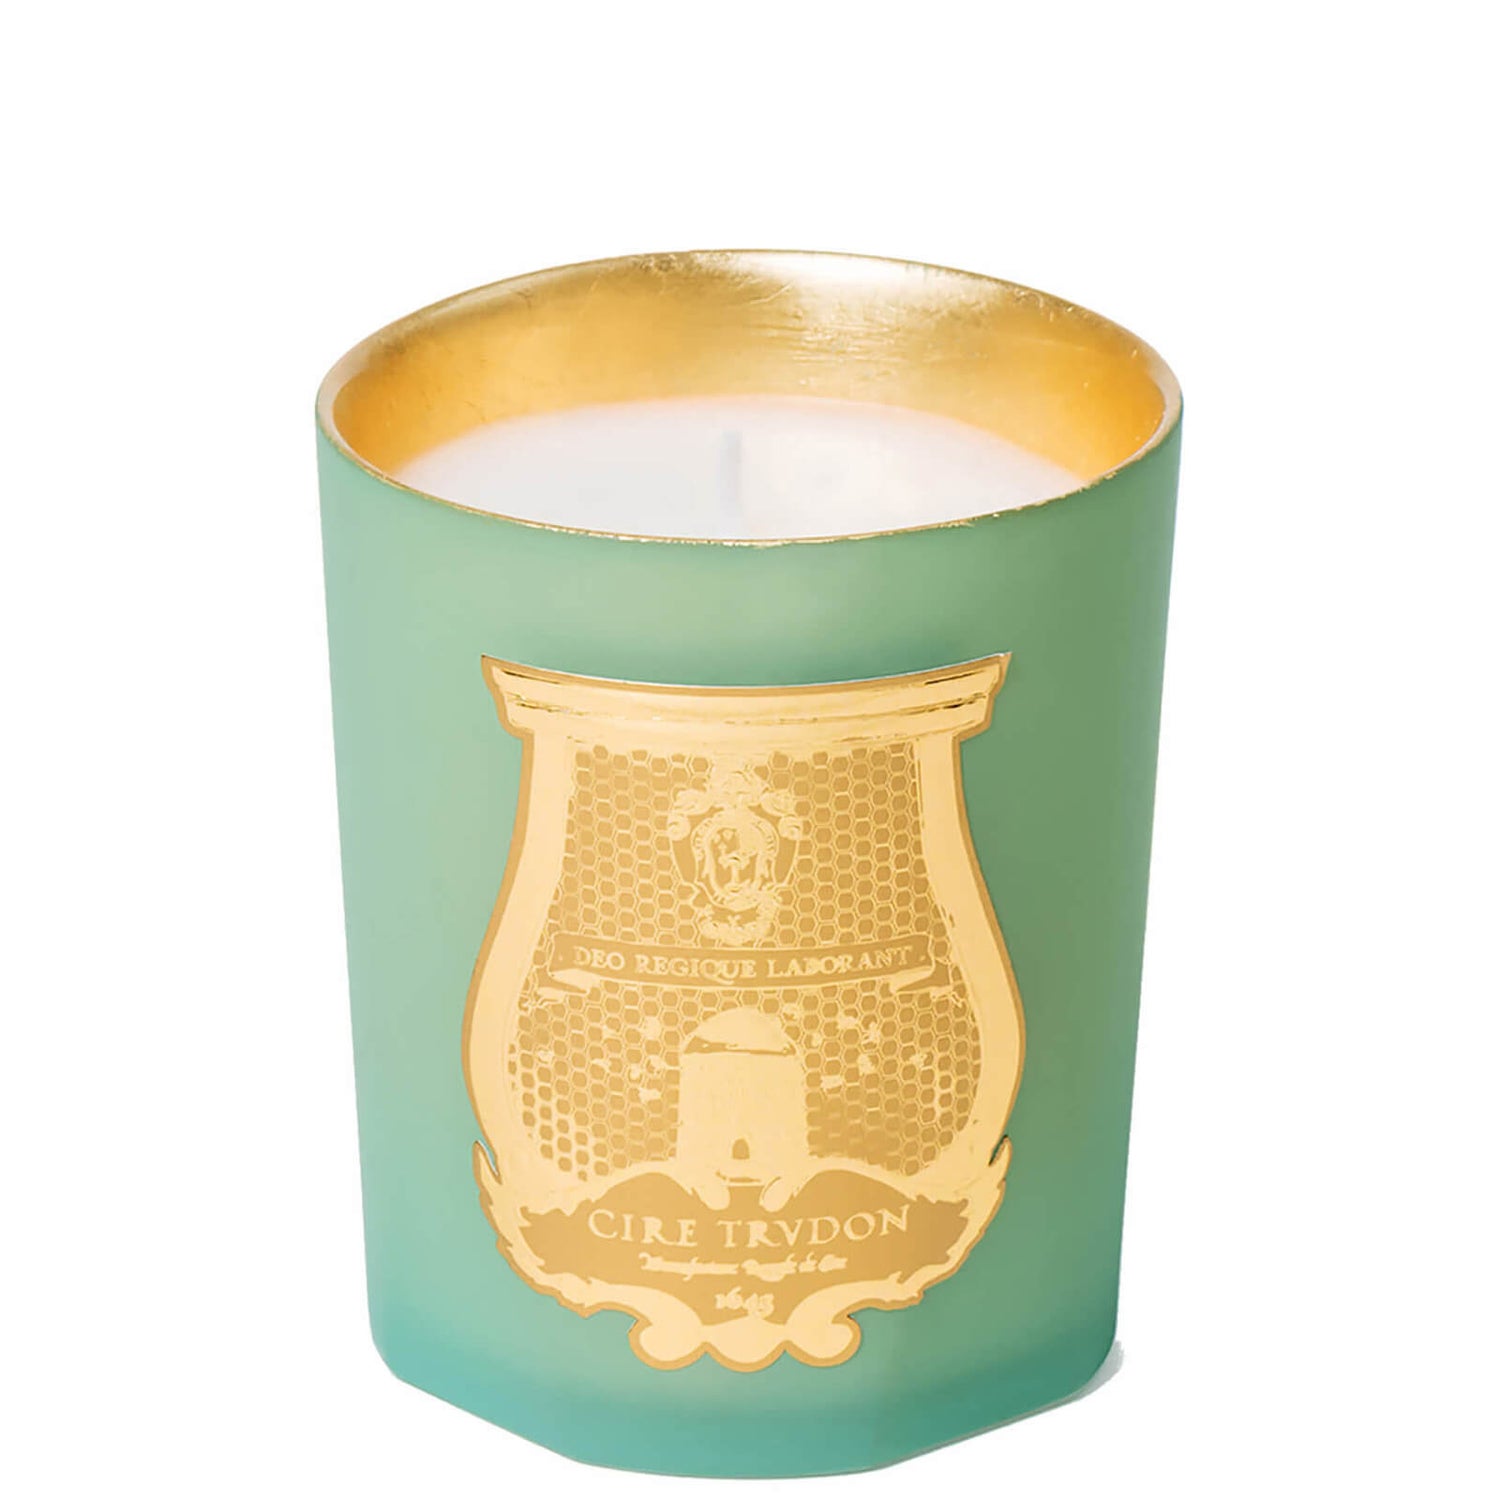 Cire Trudon Gizeh Candle - 270g | Cult Beauty